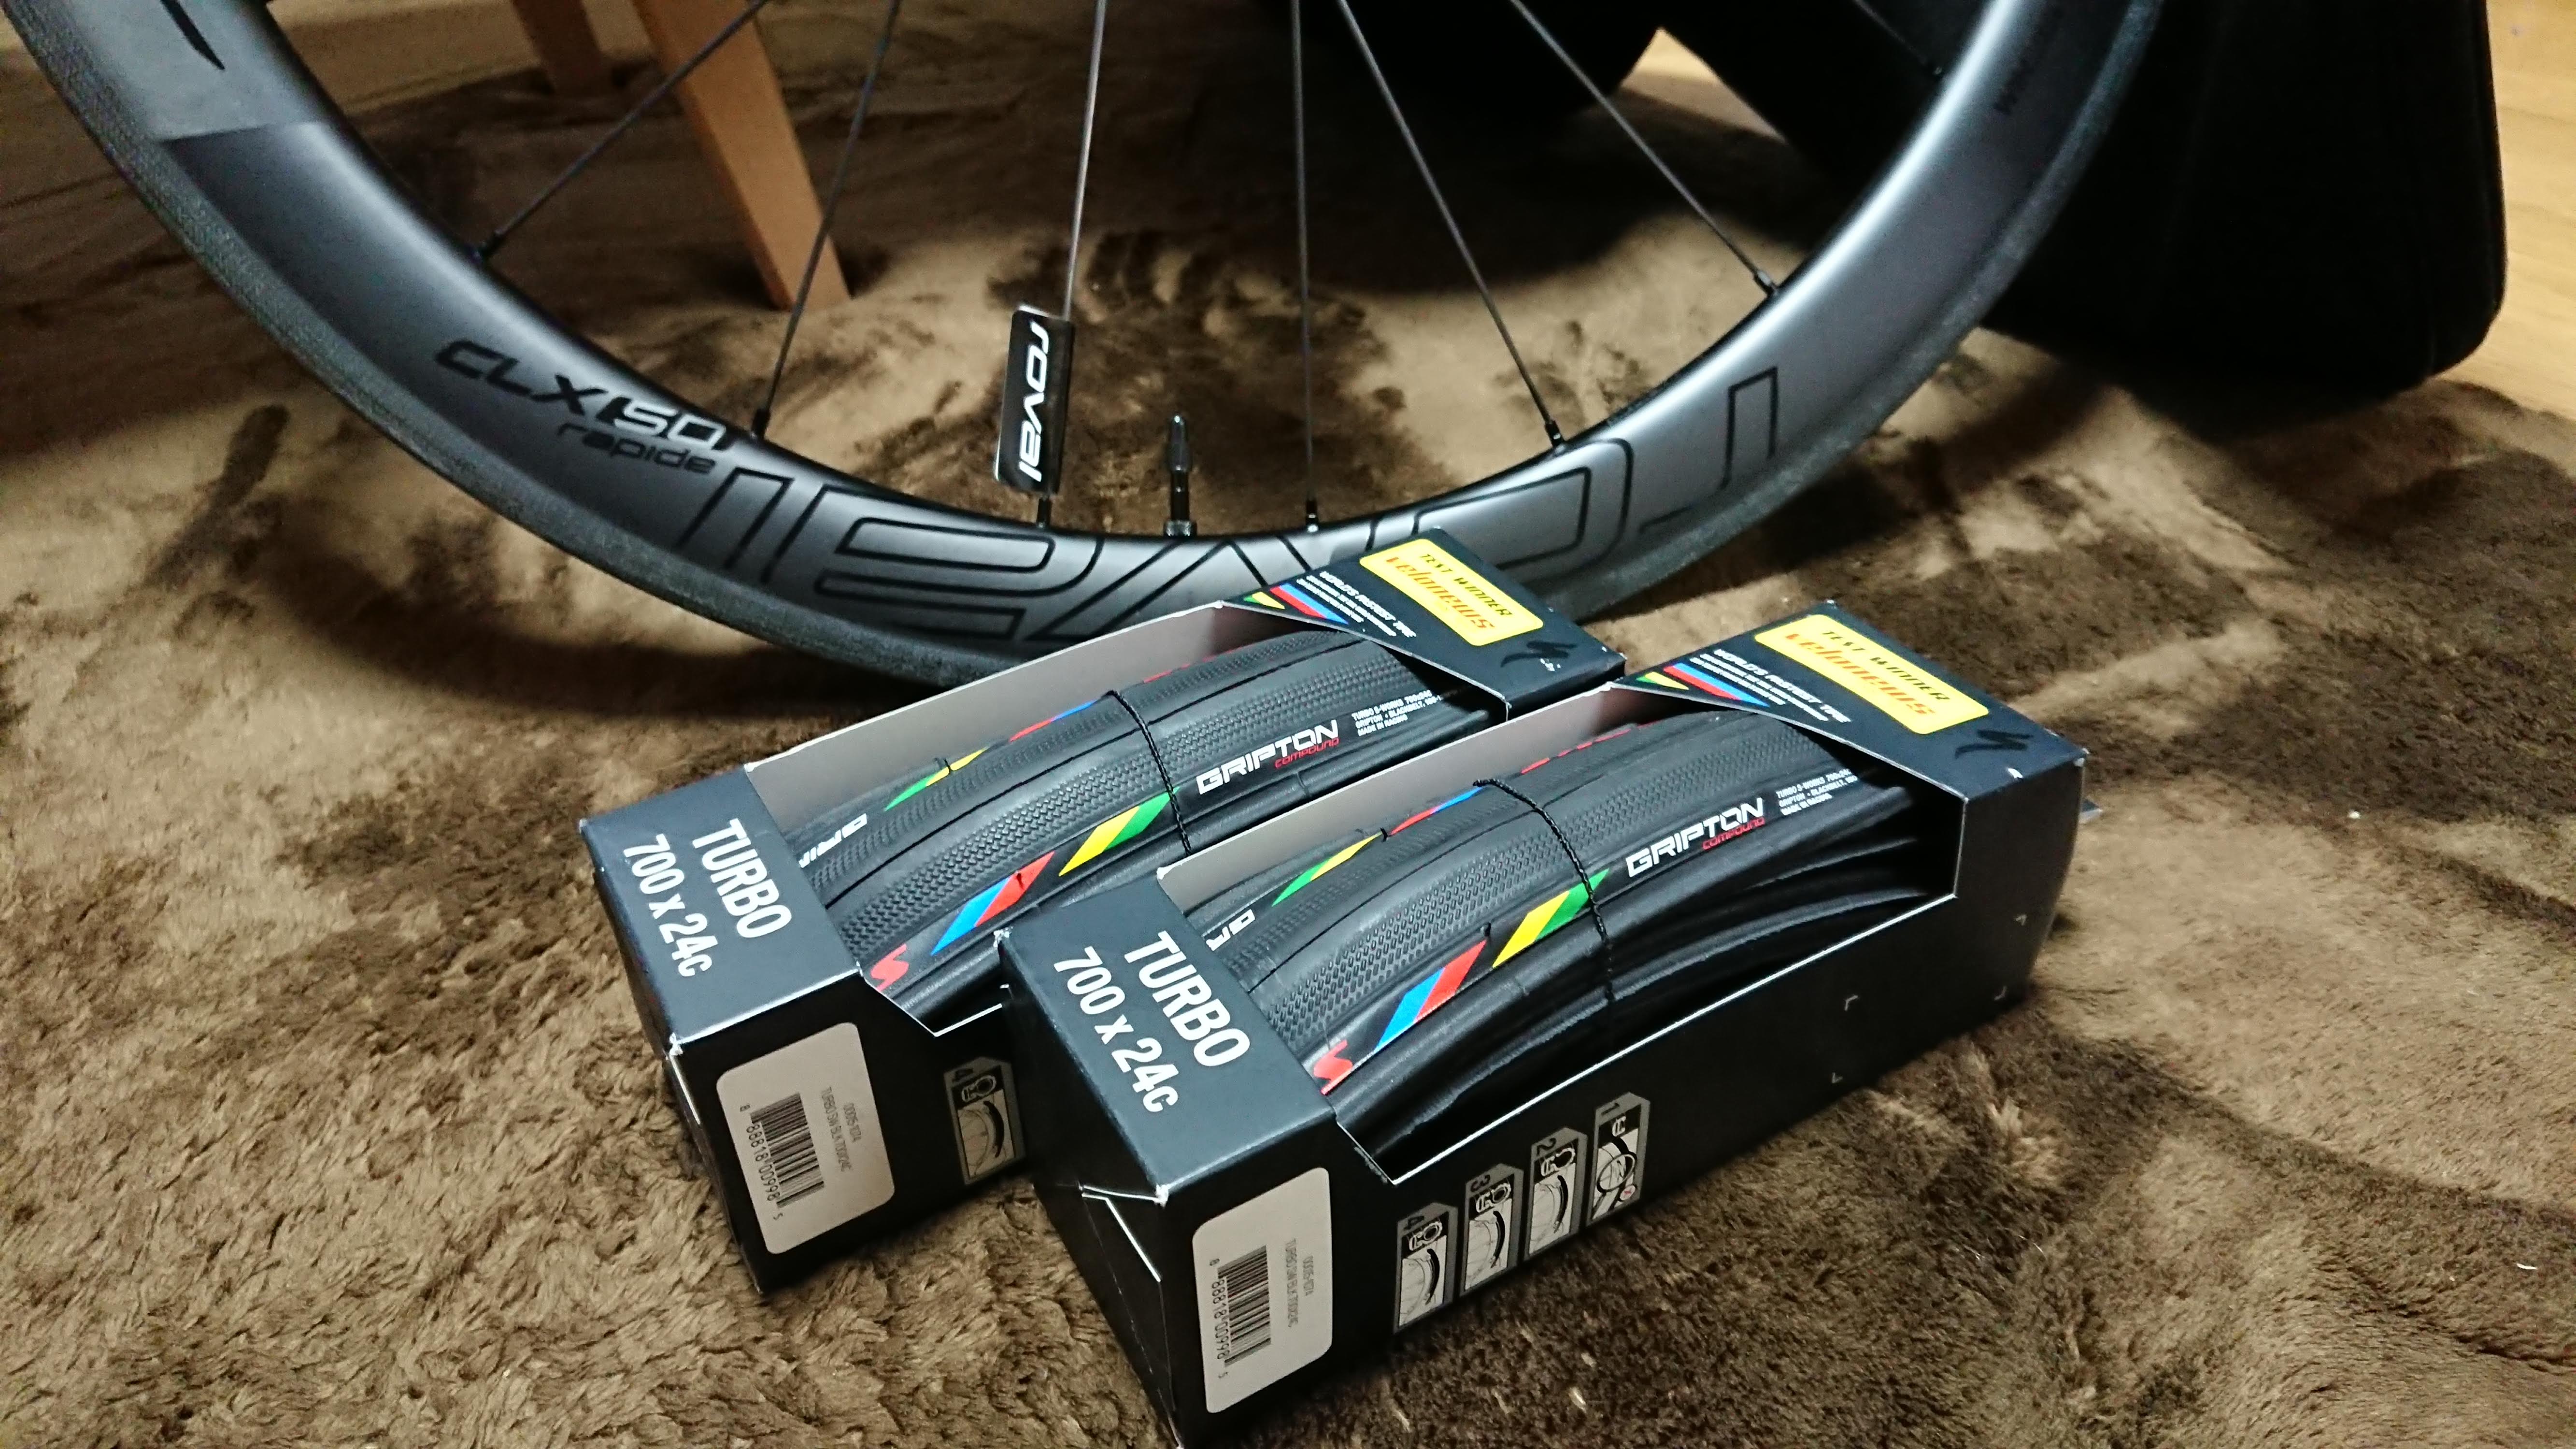 SPECIALIZED ROVAL CLX50は何がそんなに良いのか？（その１ 